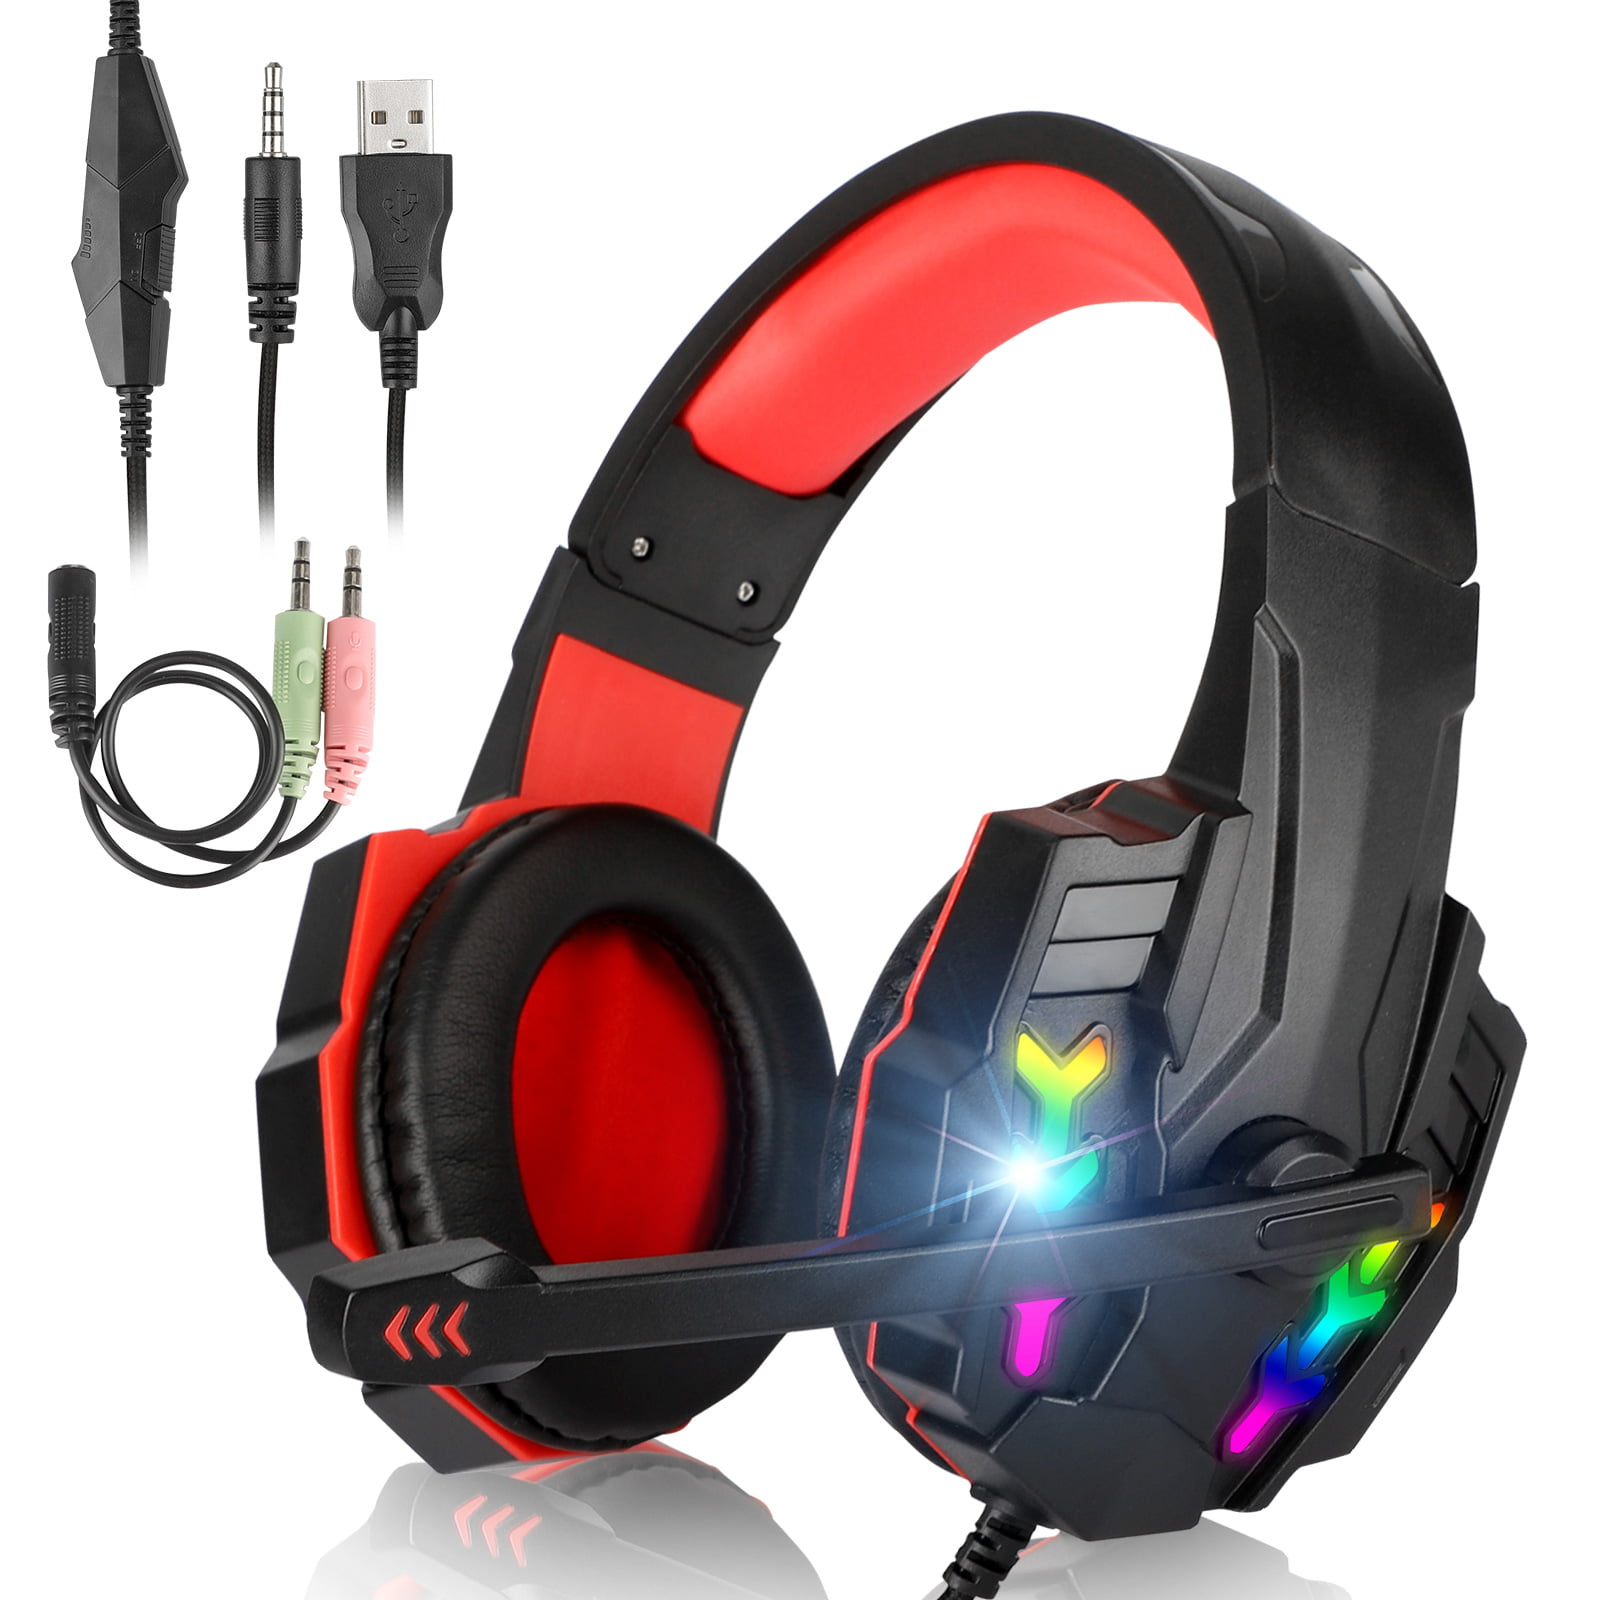 50mm Driver 3.5mm Gaming Headset with Microphone for PC Xbox One 120 Degree Boom Mic Noise Cancelling Gaming Headphones with Mic for Switch PS4 LED Light PS5 Soft Memory Earmuff for Laptop Mac